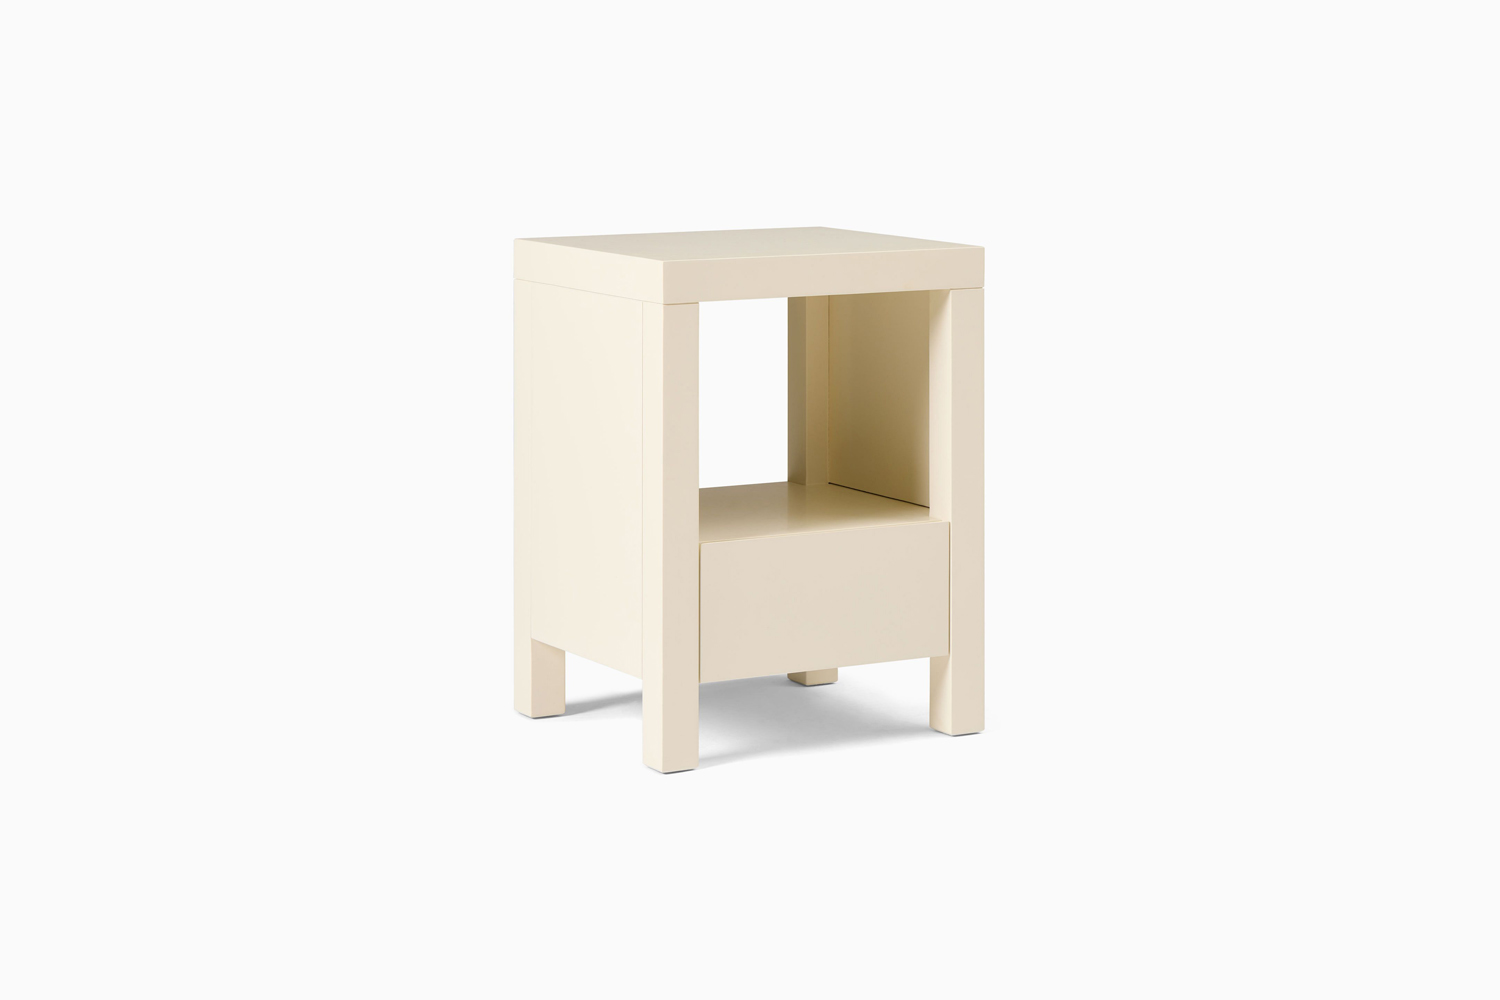 the parsons nightstand, shown in ivory, is \$349 at west elm. 16